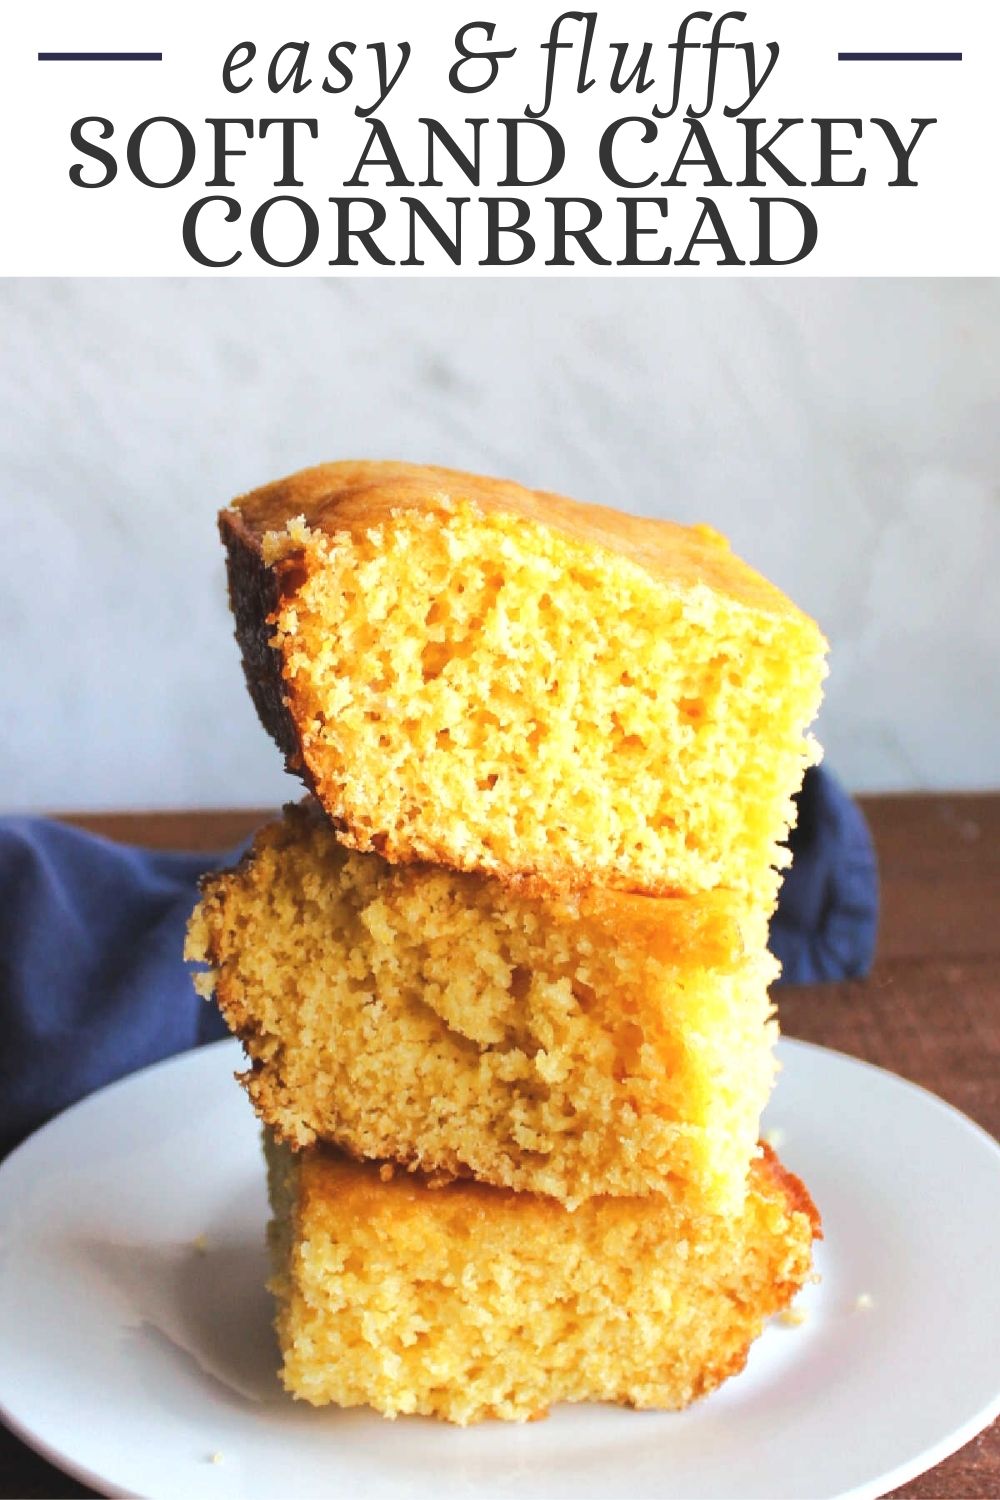 This sweet cakey cornbread is so easy to make, fluffy and oh so good. It tastes just the like cornbread from our favorite BBQ restaurant.